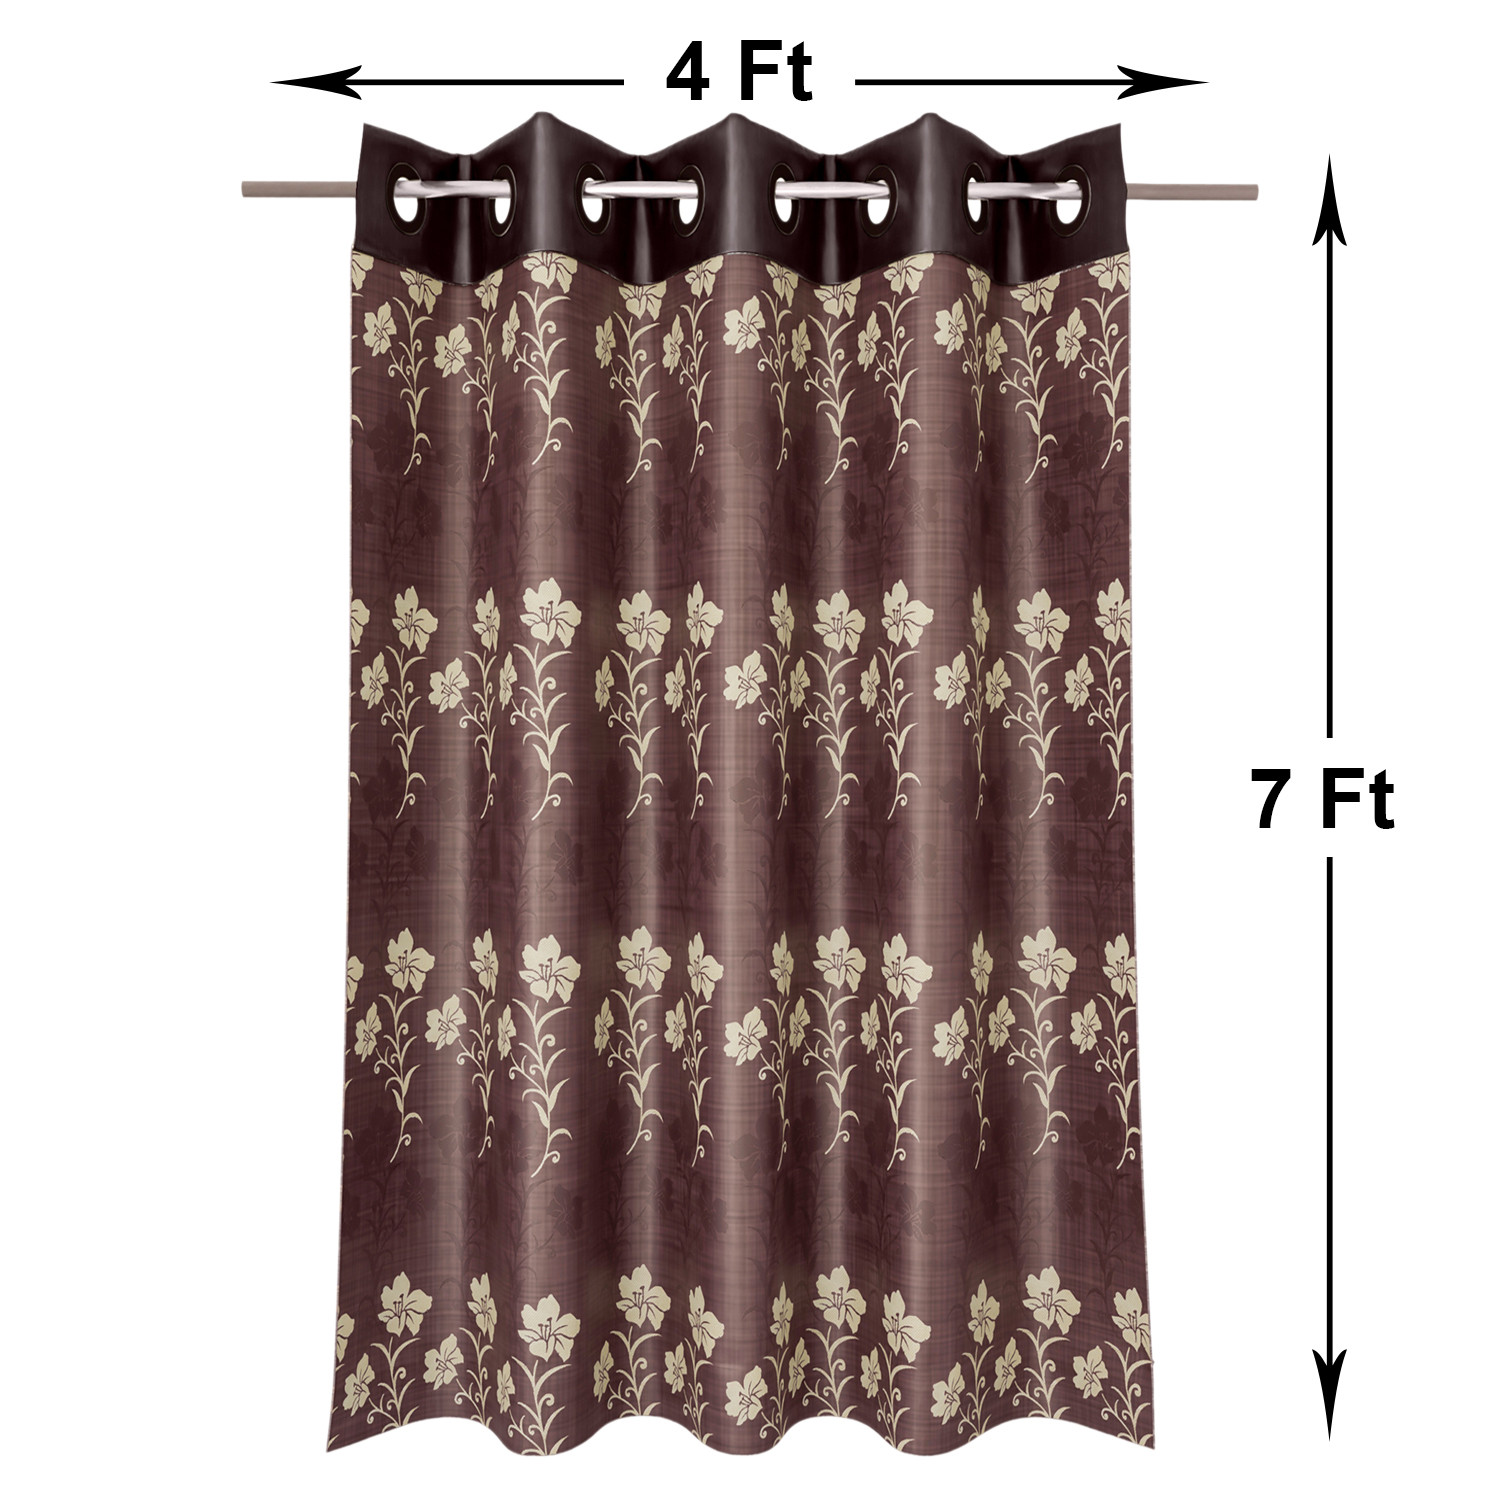 Kuber Industries Faux Silk Decorative 7 Feet Door Curtain | Floral Print Blackout Drapes Curtain With 8 Eyelet For Home & Office (Coffee)